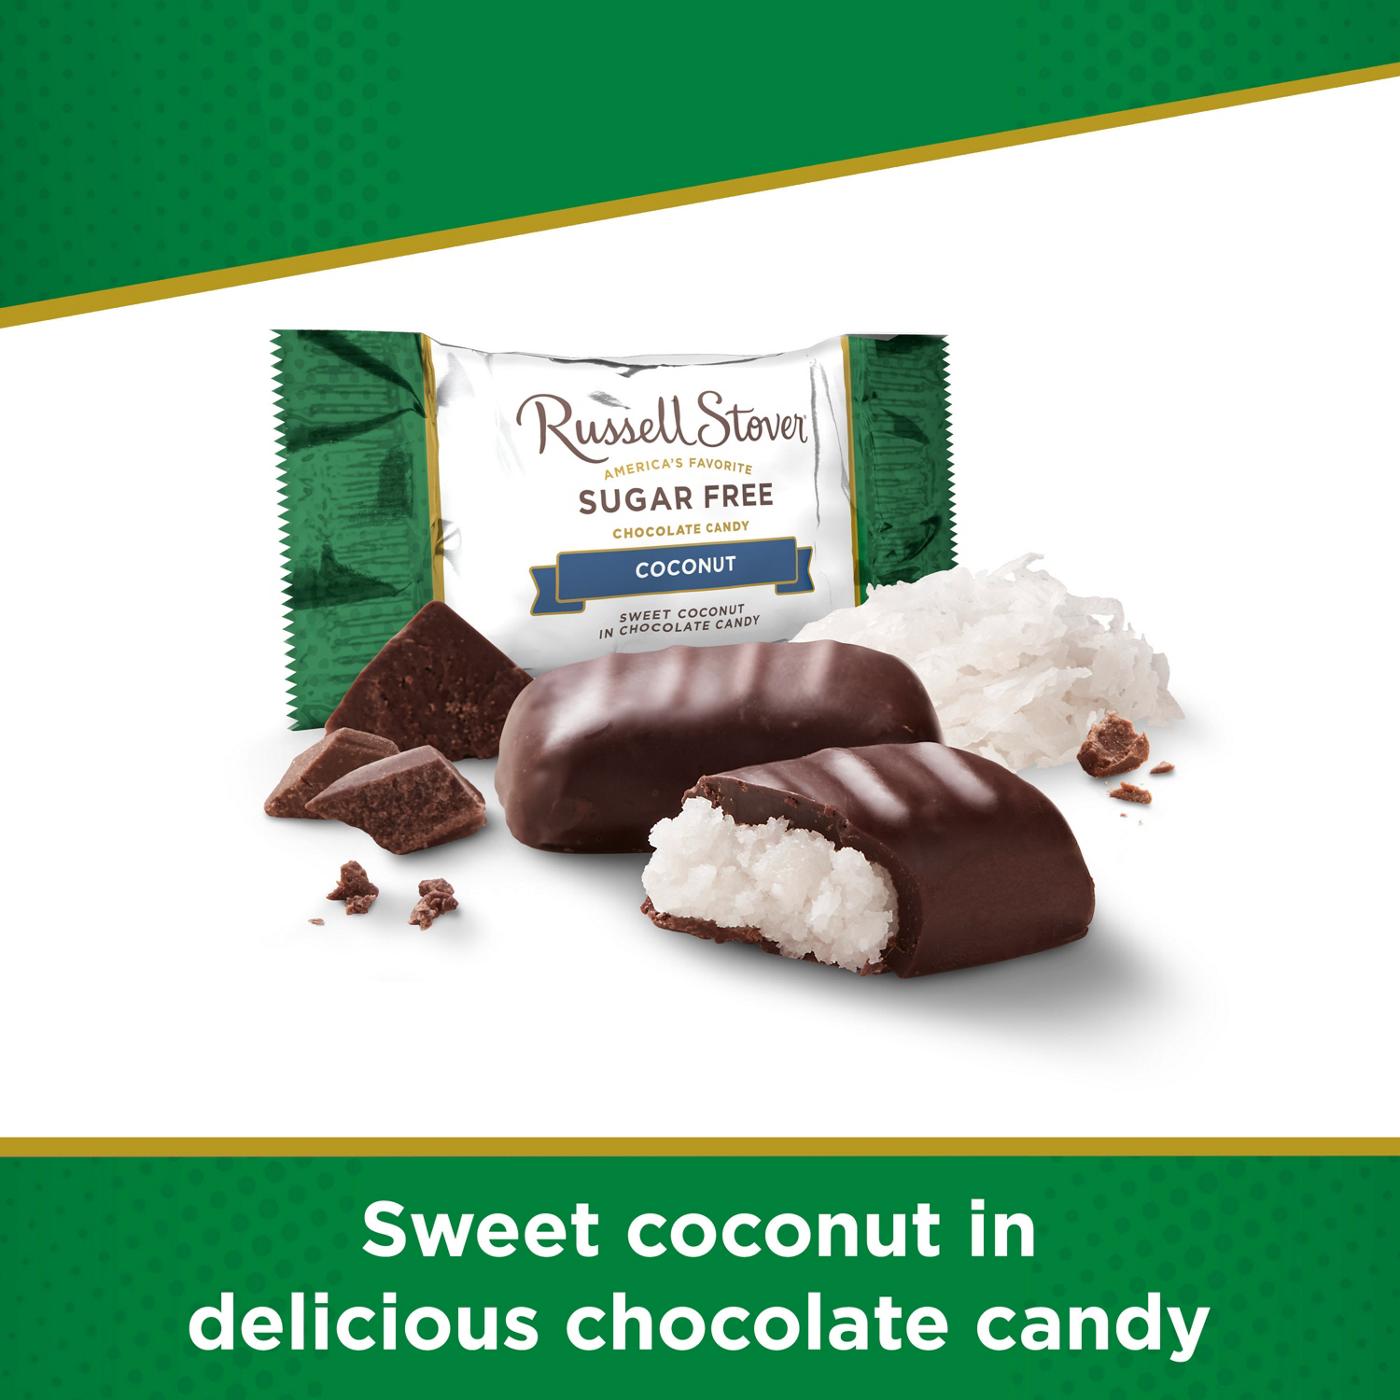 Russell Stover Sugar Free Coconut Chocolate Candy; image 8 of 8